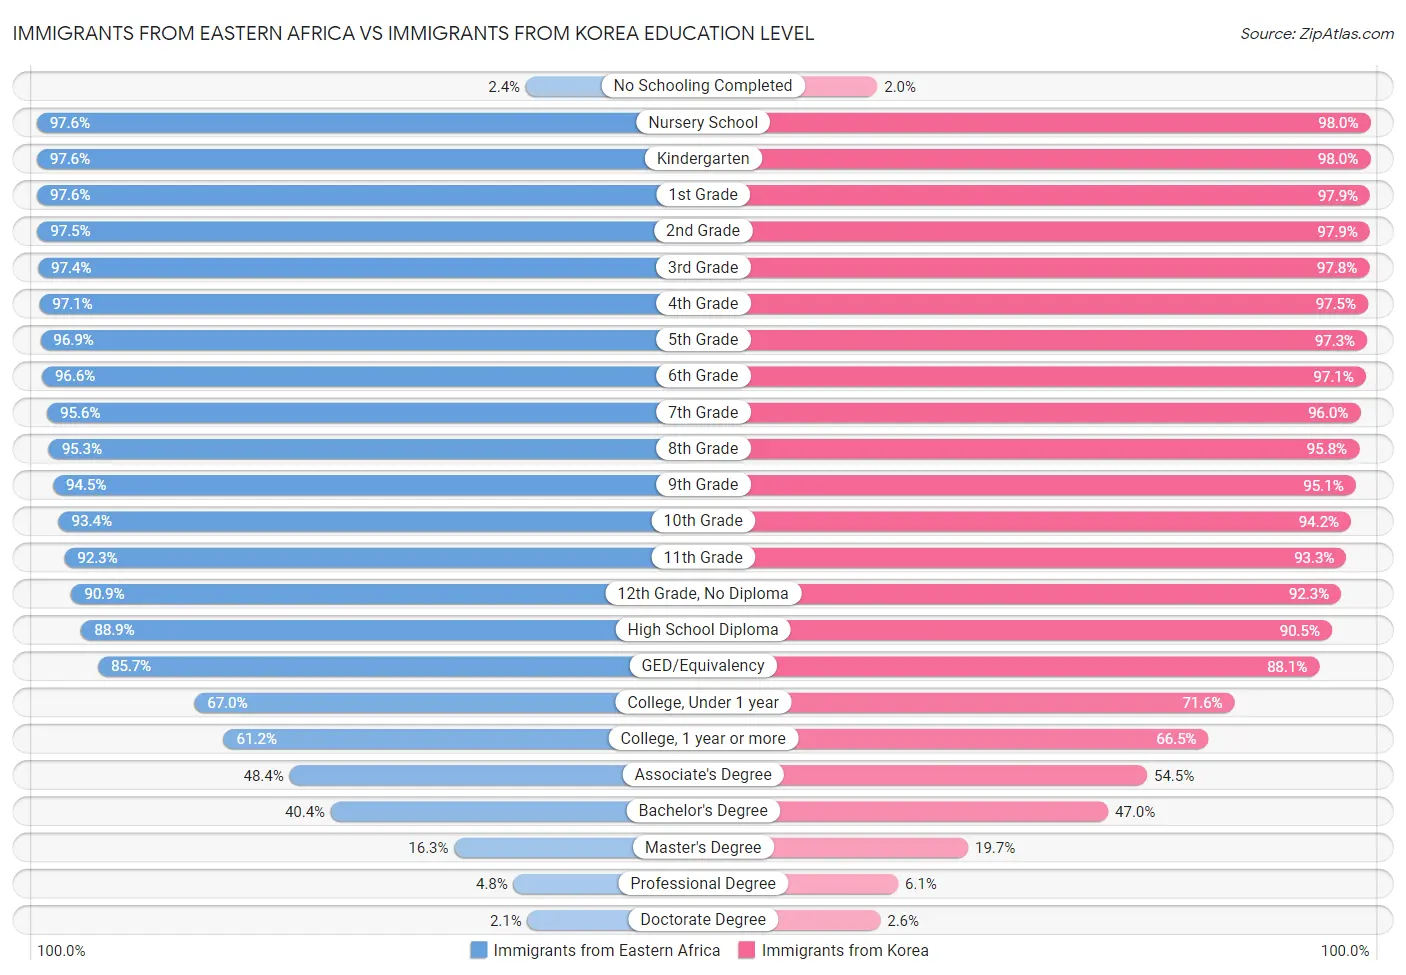 Immigrants from Eastern Africa vs Immigrants from Korea Education Level